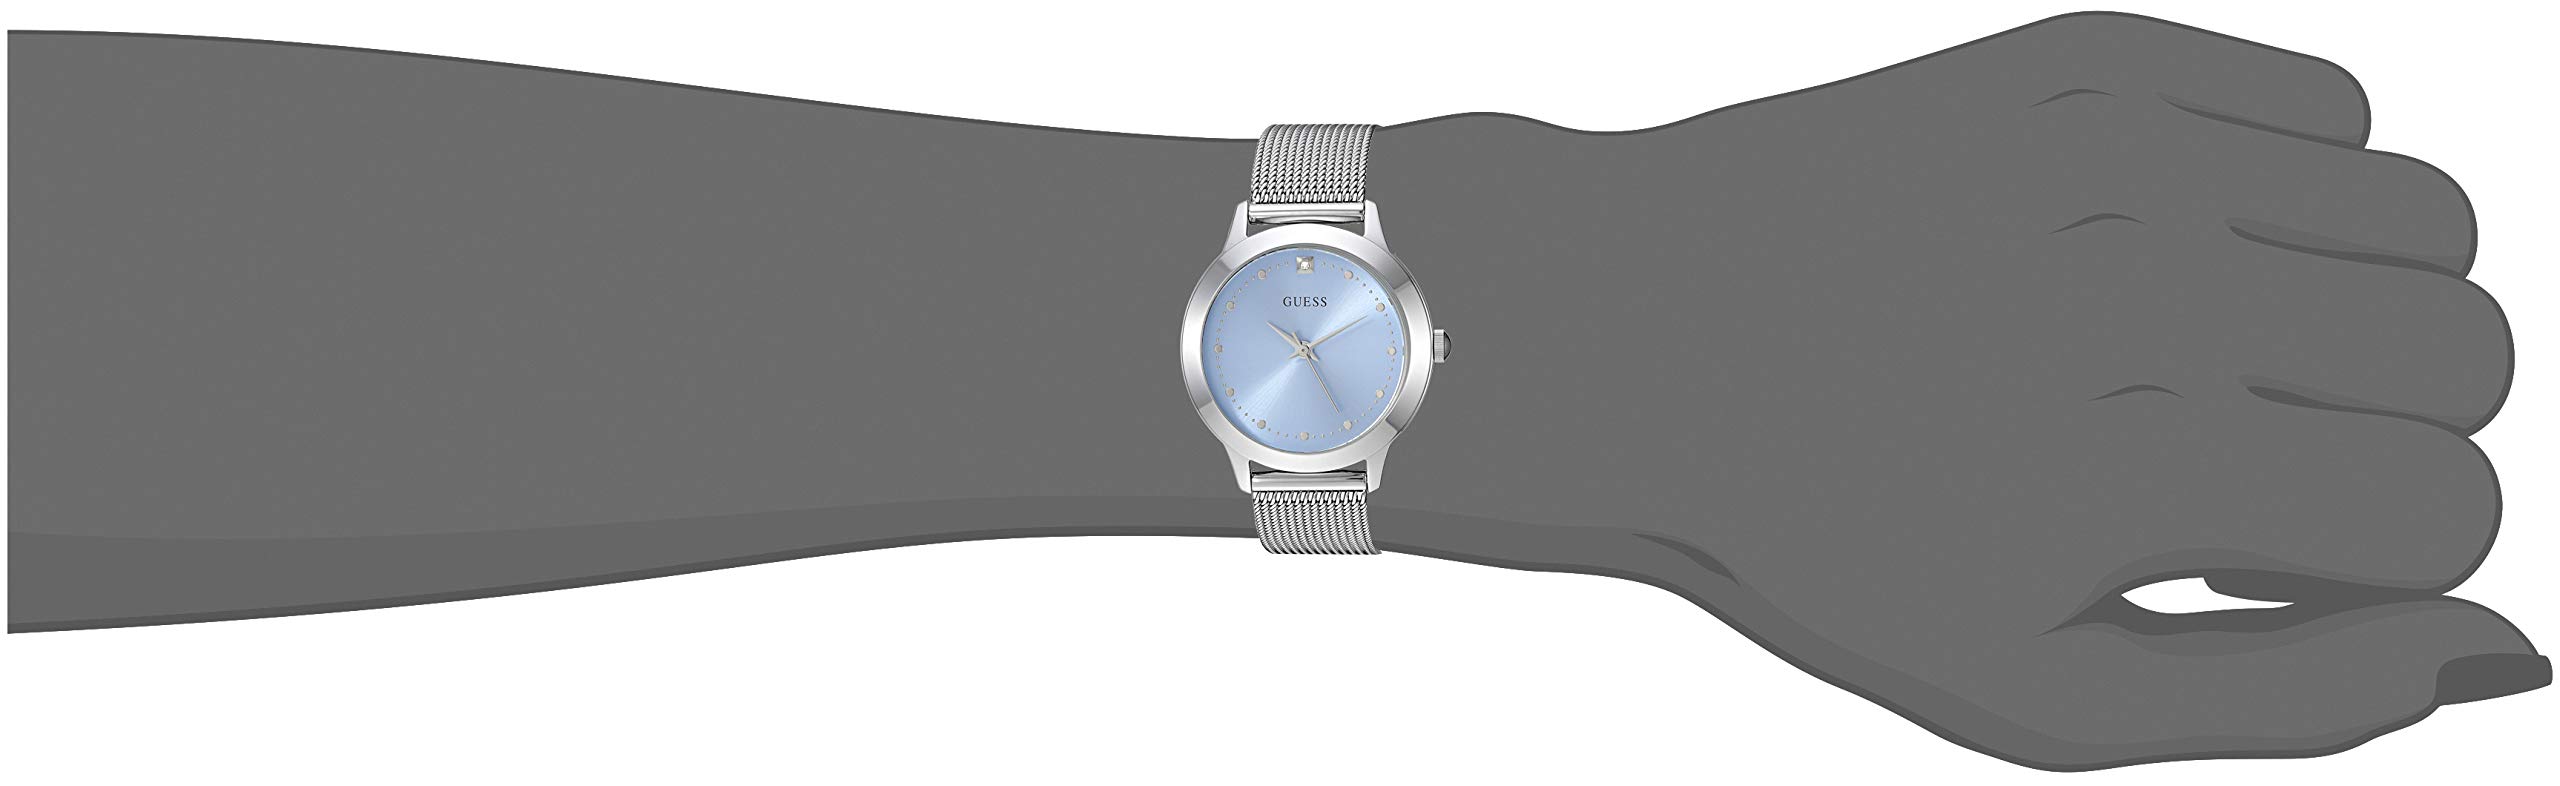 GUESS Classic Slim Stainless Steel Bracelet Watch